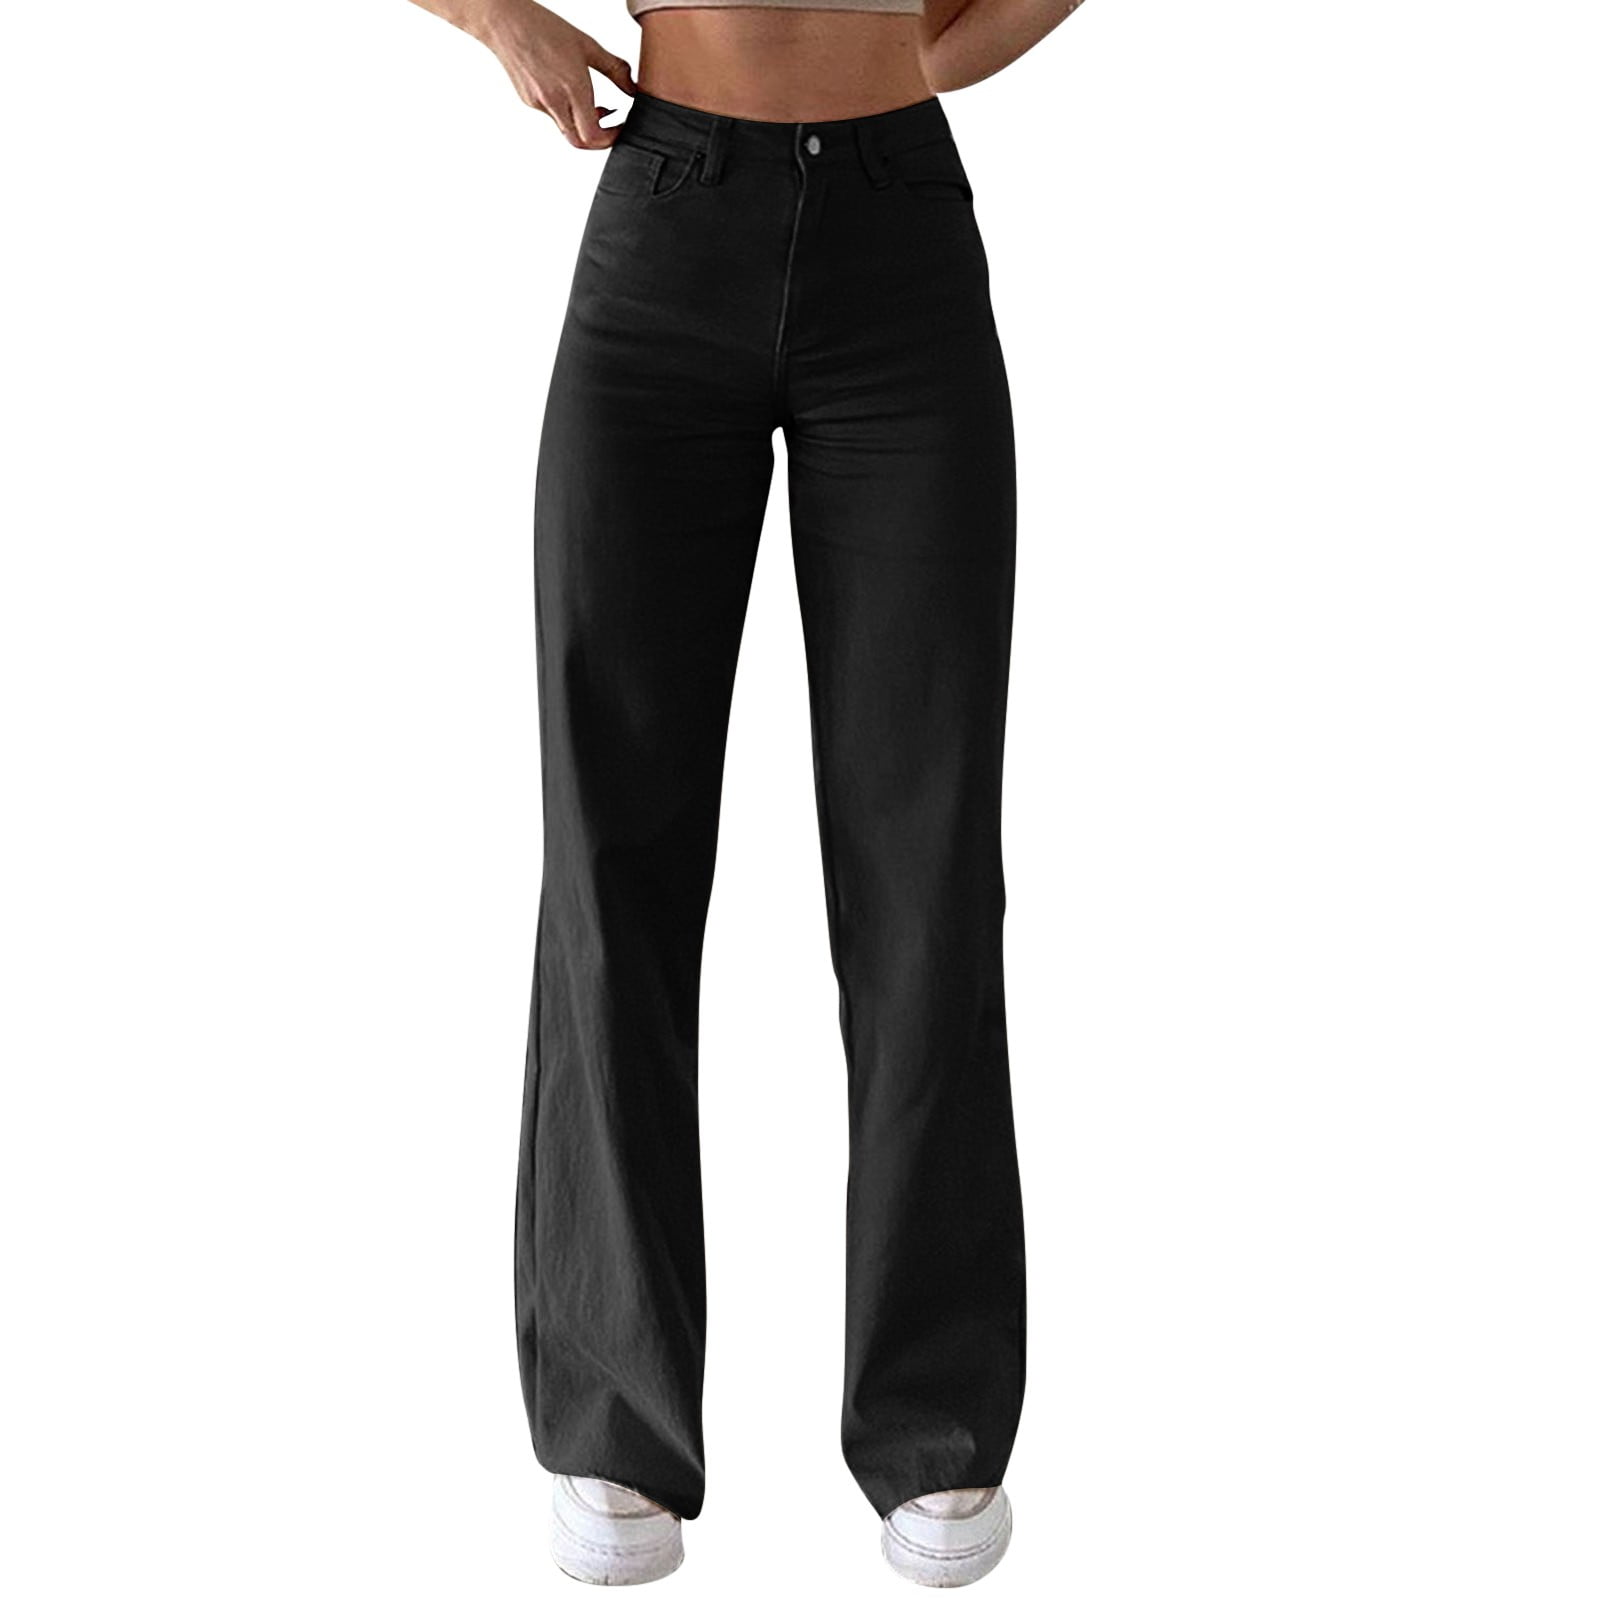 SATINATO Women's Straight Pants Stretch Slim Skinny Solid Trousers Casual  Business Office (0, Black) at  Women's Clothing store